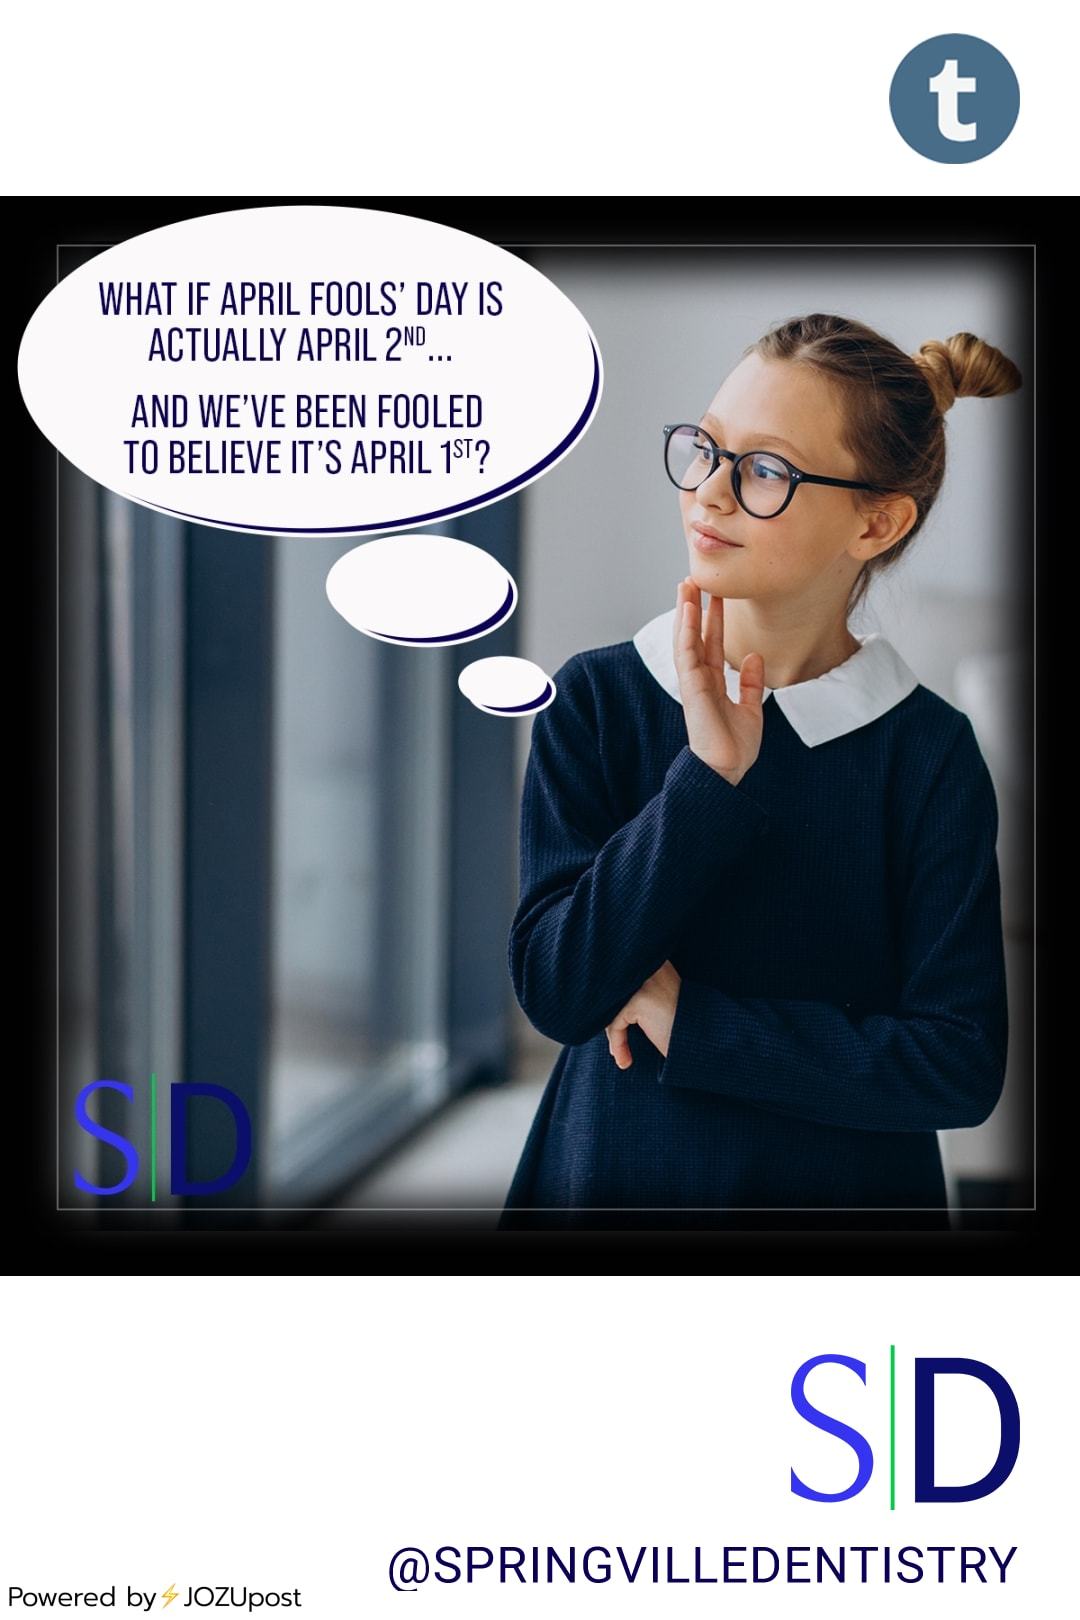 What if April fools Day is actually April 2nd… And we’ve been fooled to believe it’s April 1st? Hmmmm
#aprilfoolsday #aprilfirst